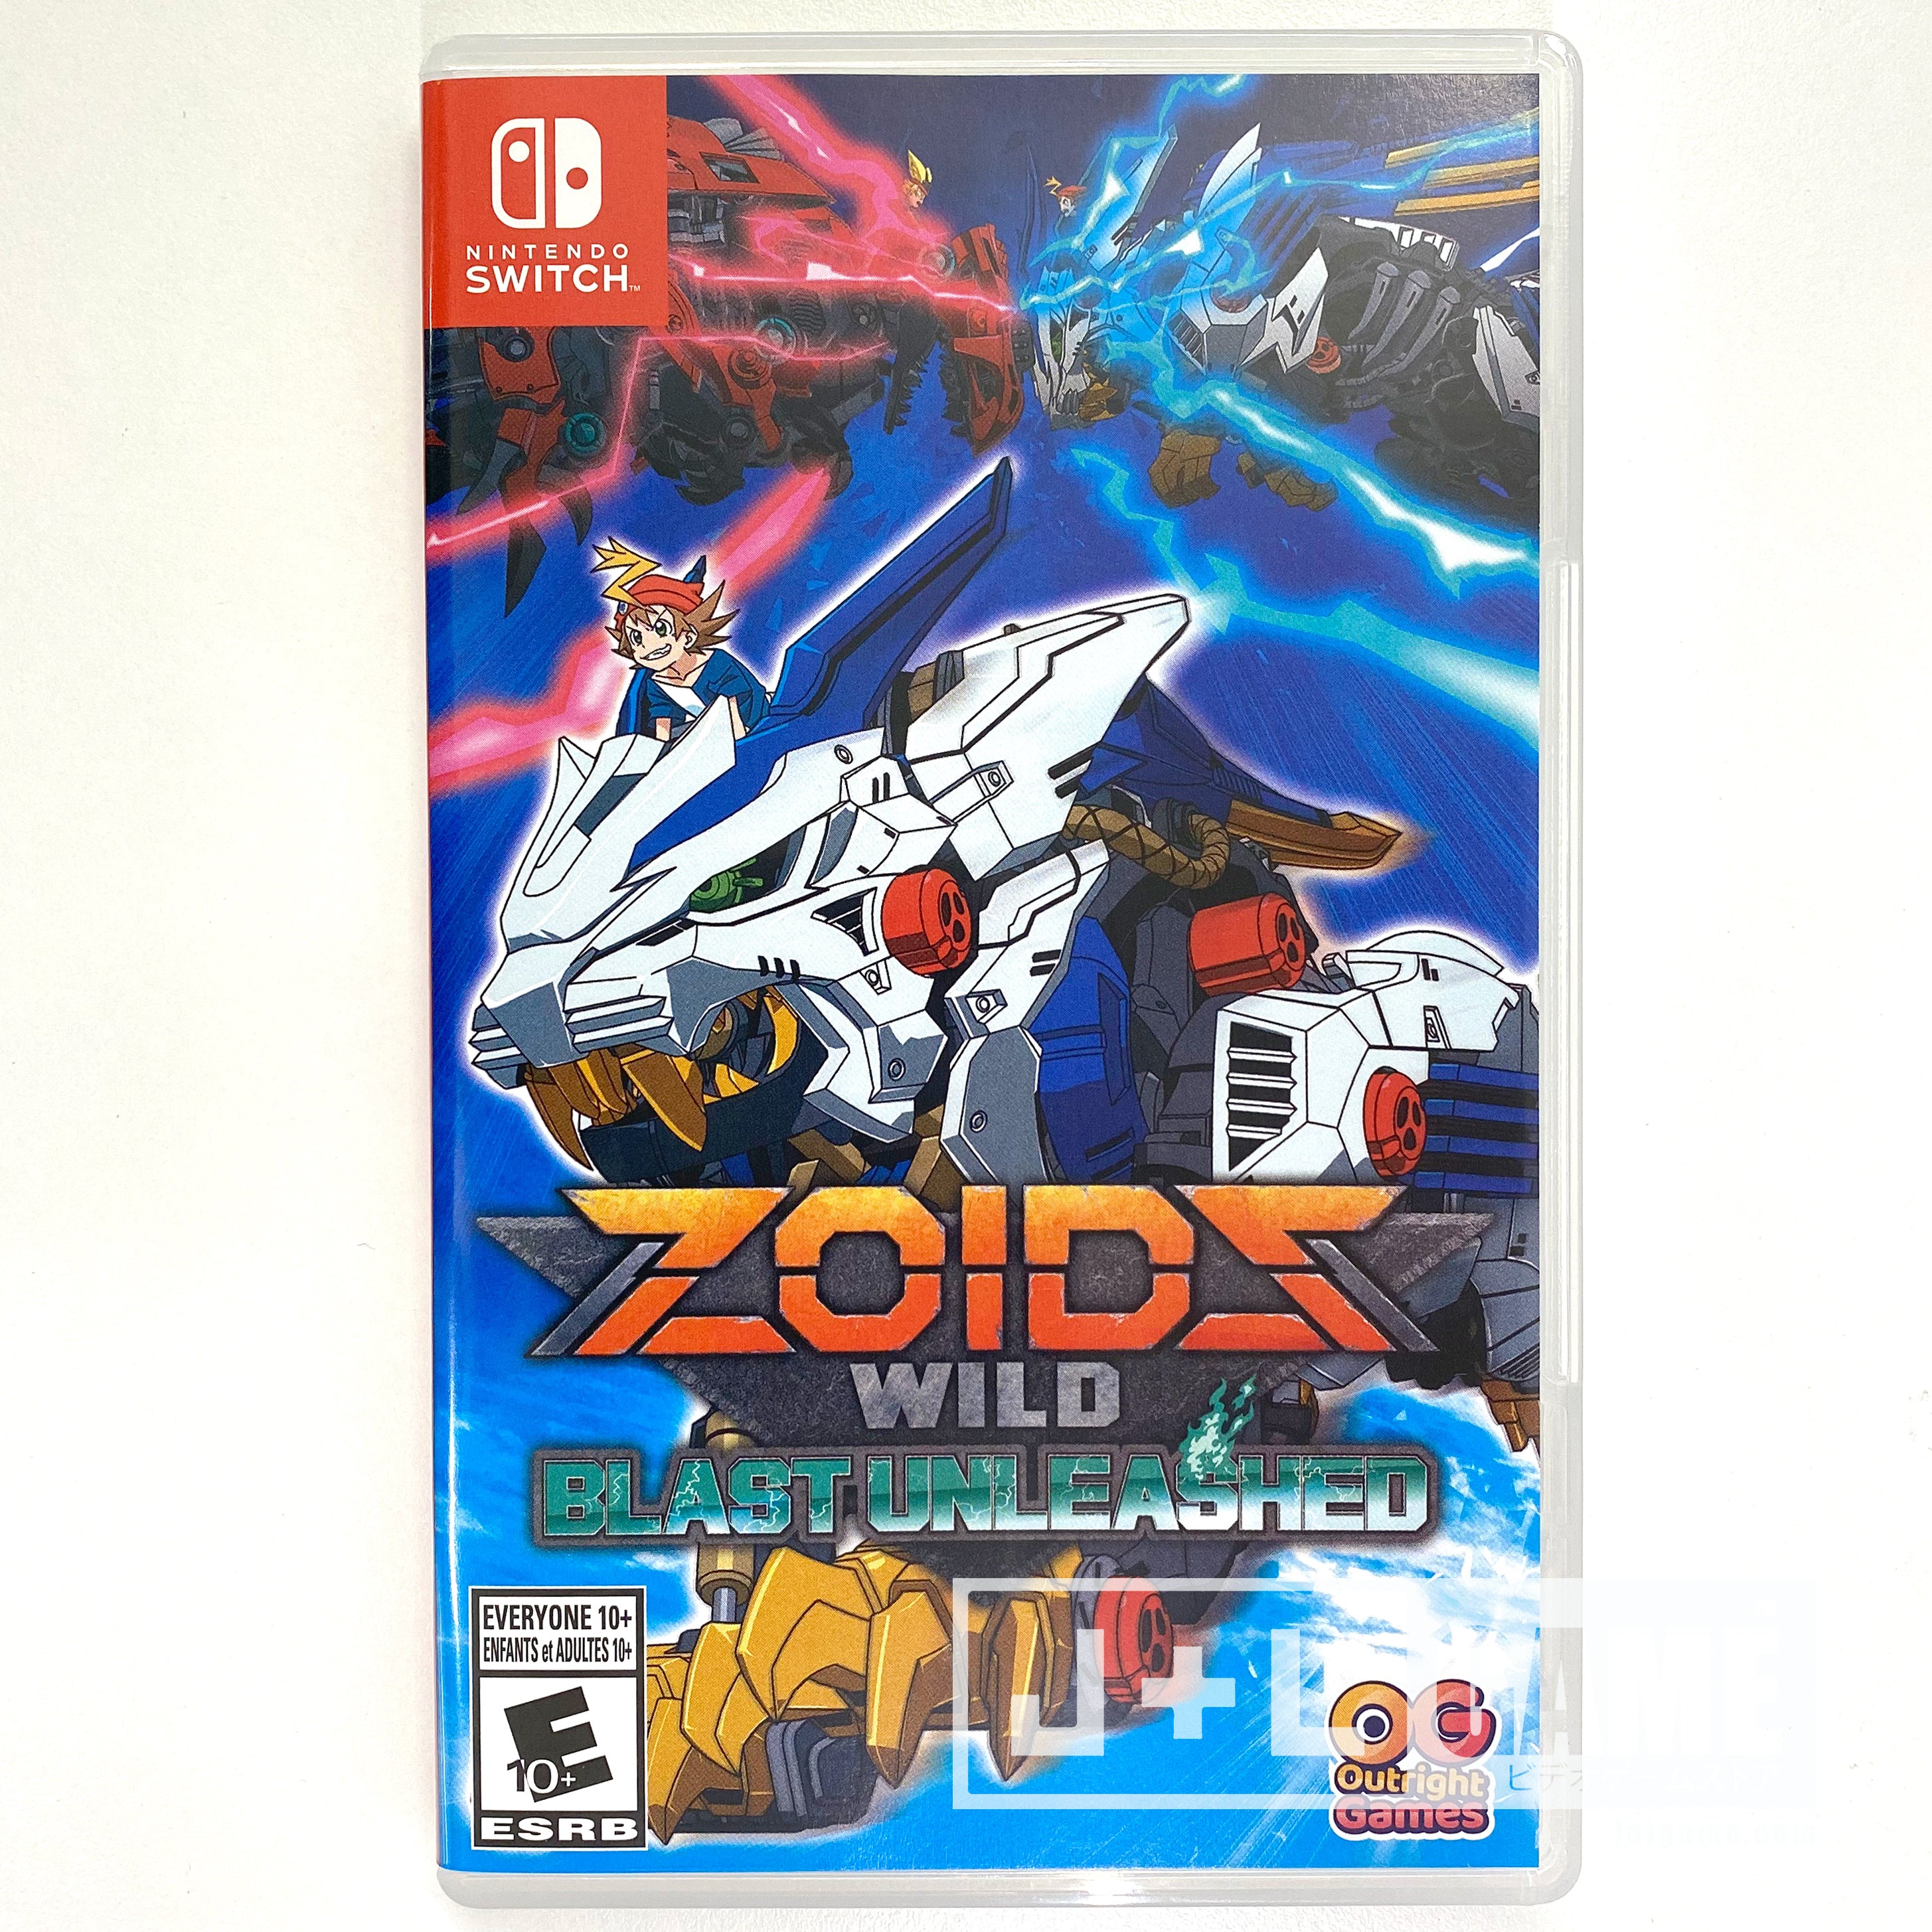 Zoids Wild: Blast Unleashed - (NSW) Nintendo Switch [UNBOXING] Video Games Outright Games   